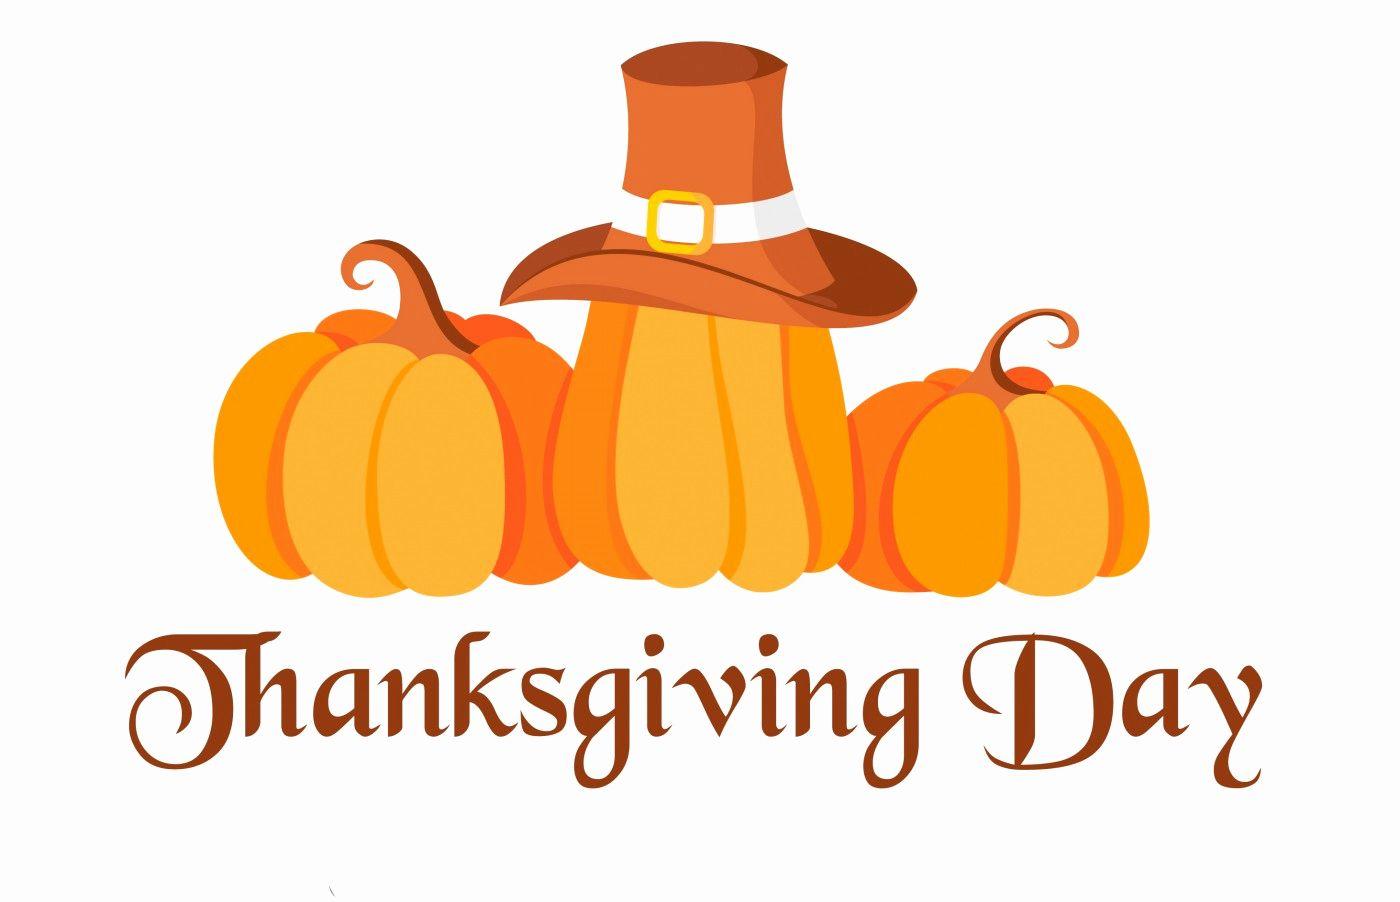 When is Thanksgiving Day Happy Thanksgiving Day Image Wallpaper